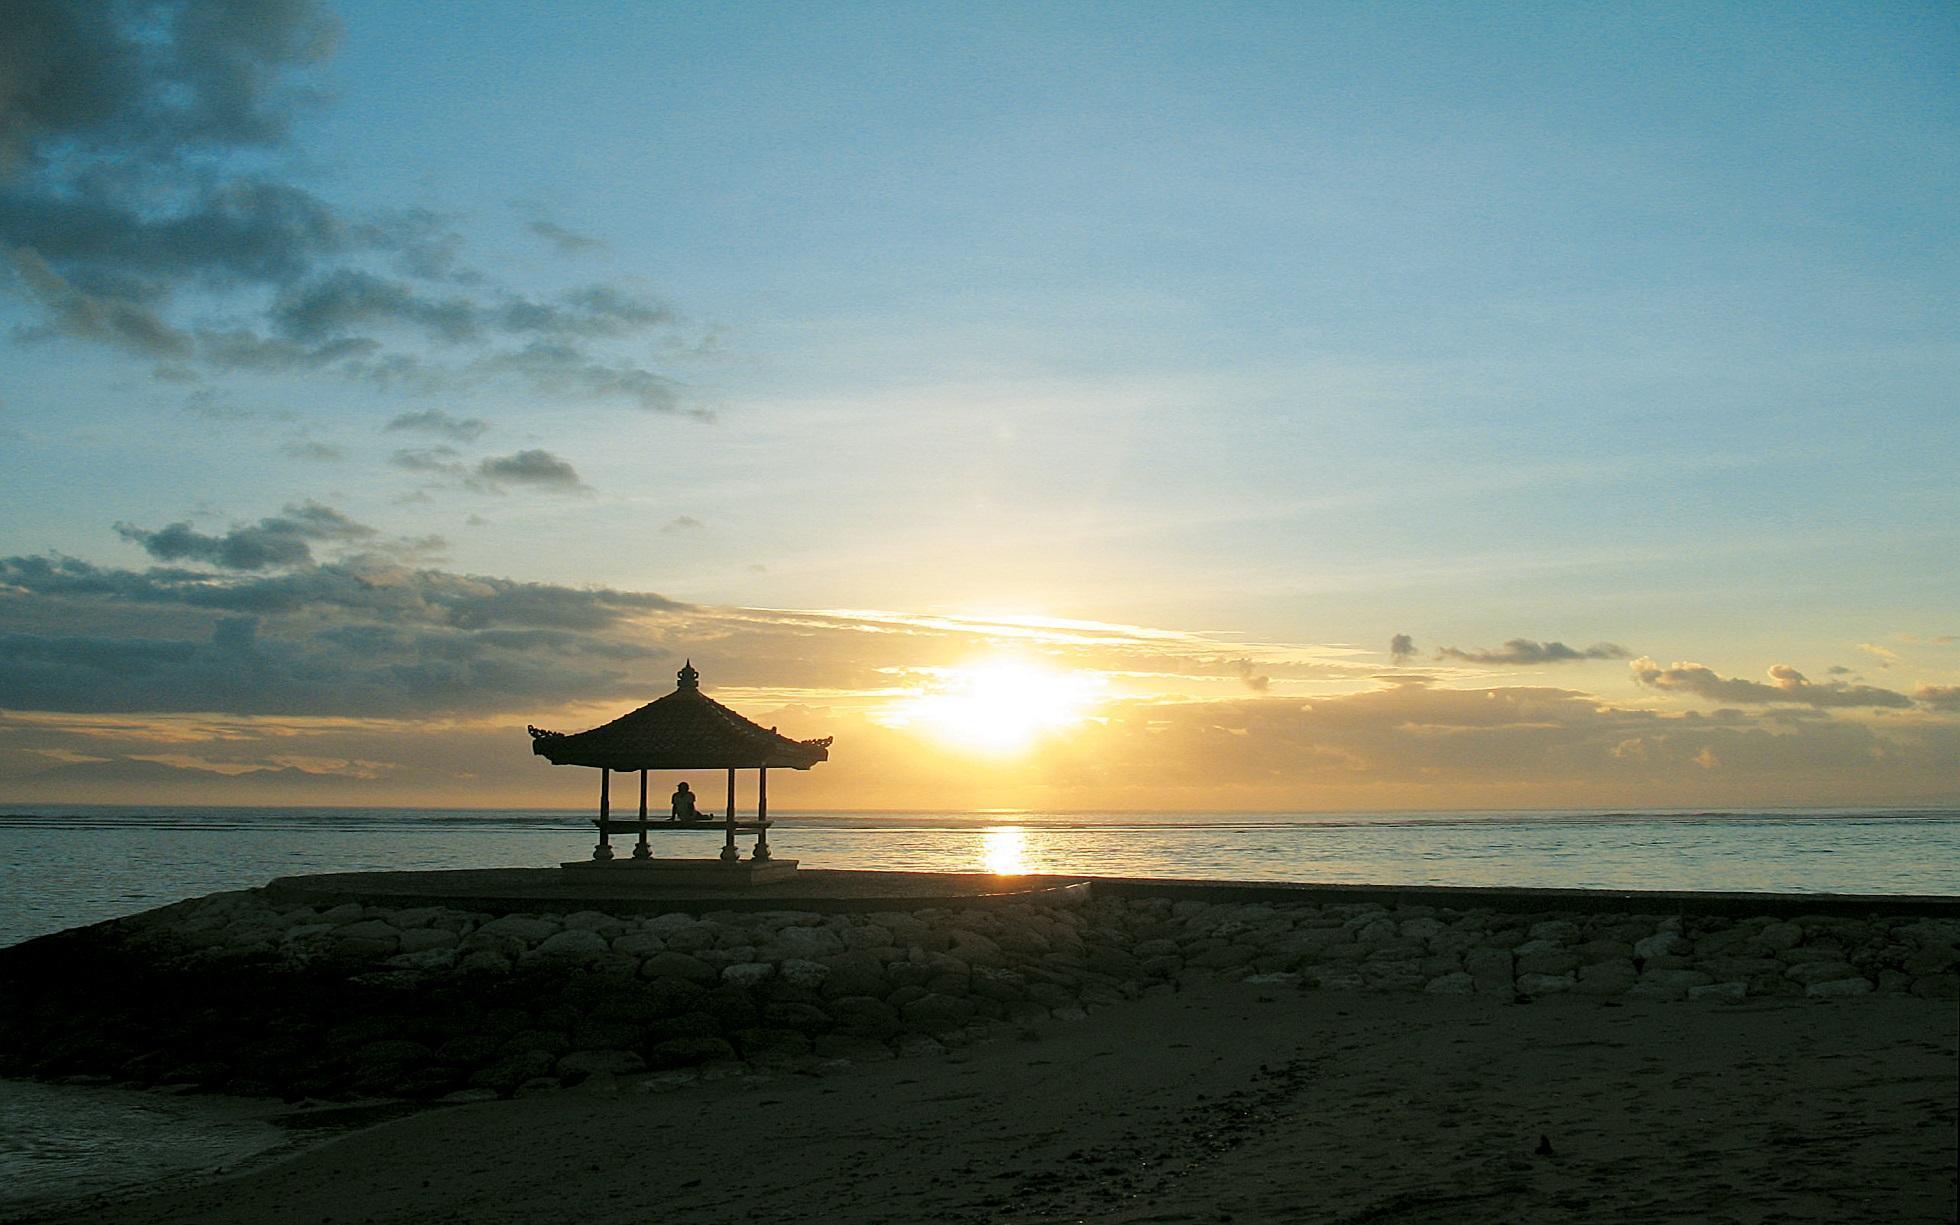 Take in the glorious sunset at Sanur Beach on Bali